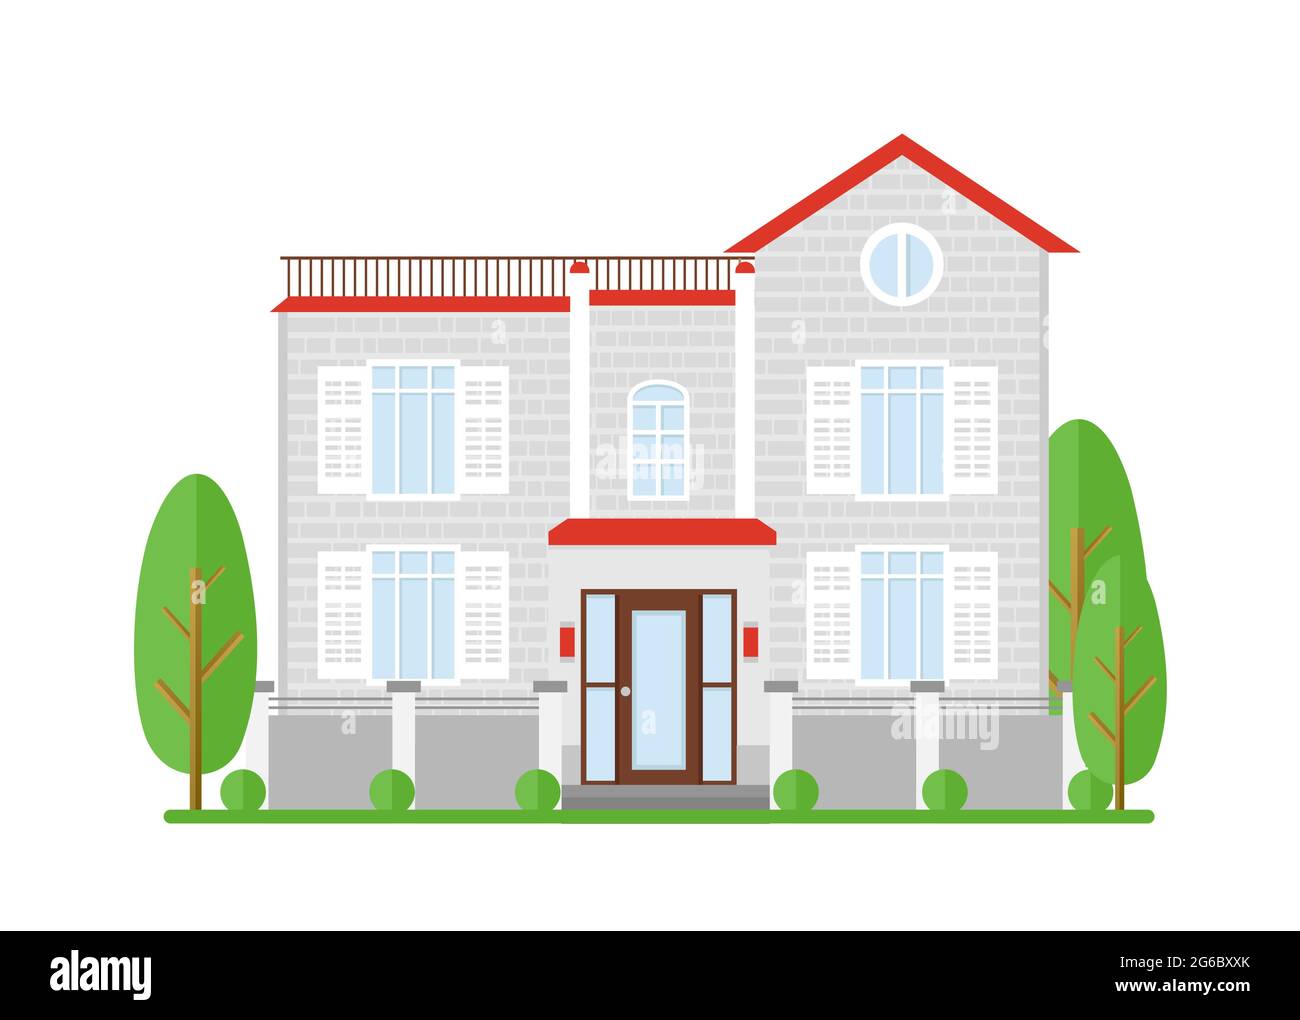 Vector illustration of real estate, house for sale. Home of family dream. Facade apartment house, cottage, building concept in flat style. Stock Vector